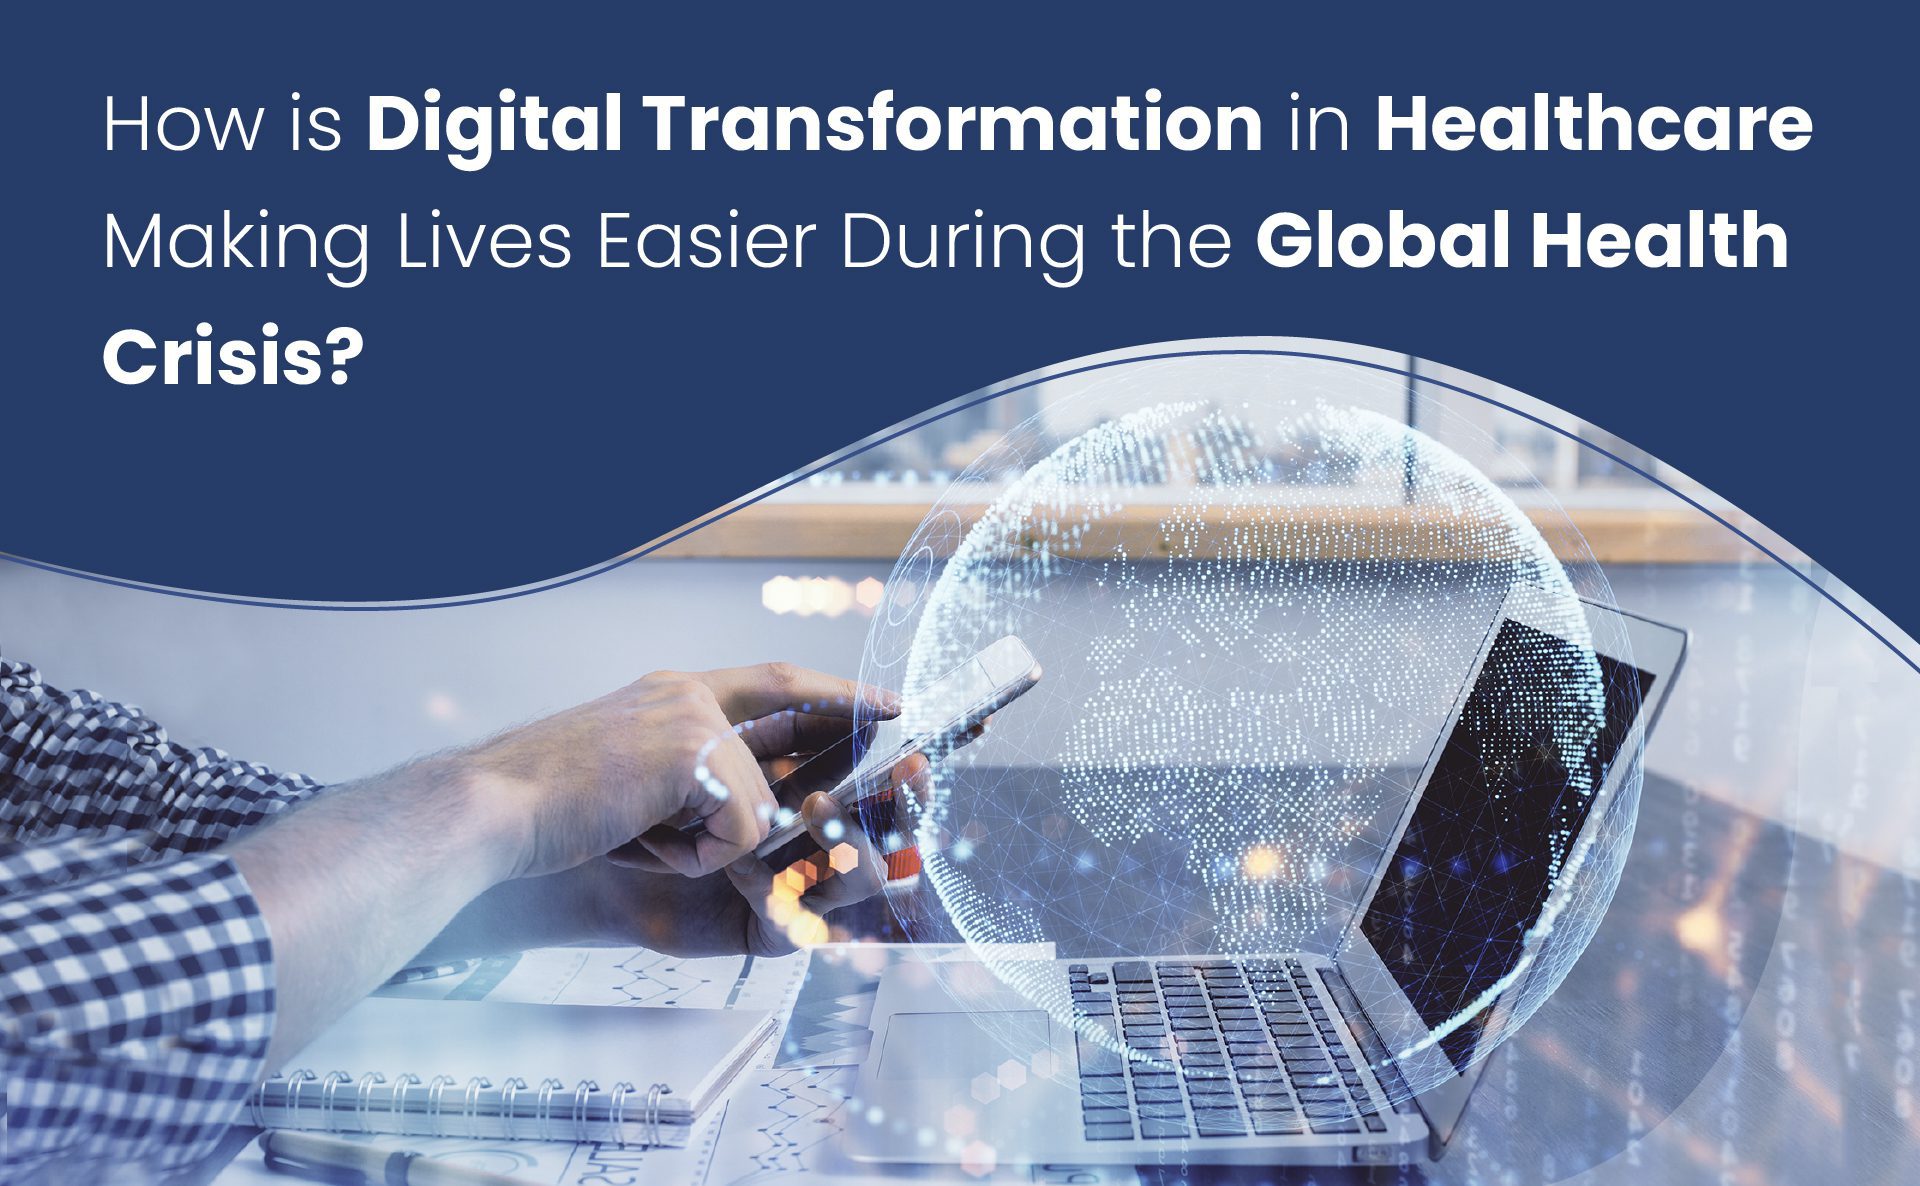 digital transformation in healthcare transforming lives during global health crisis